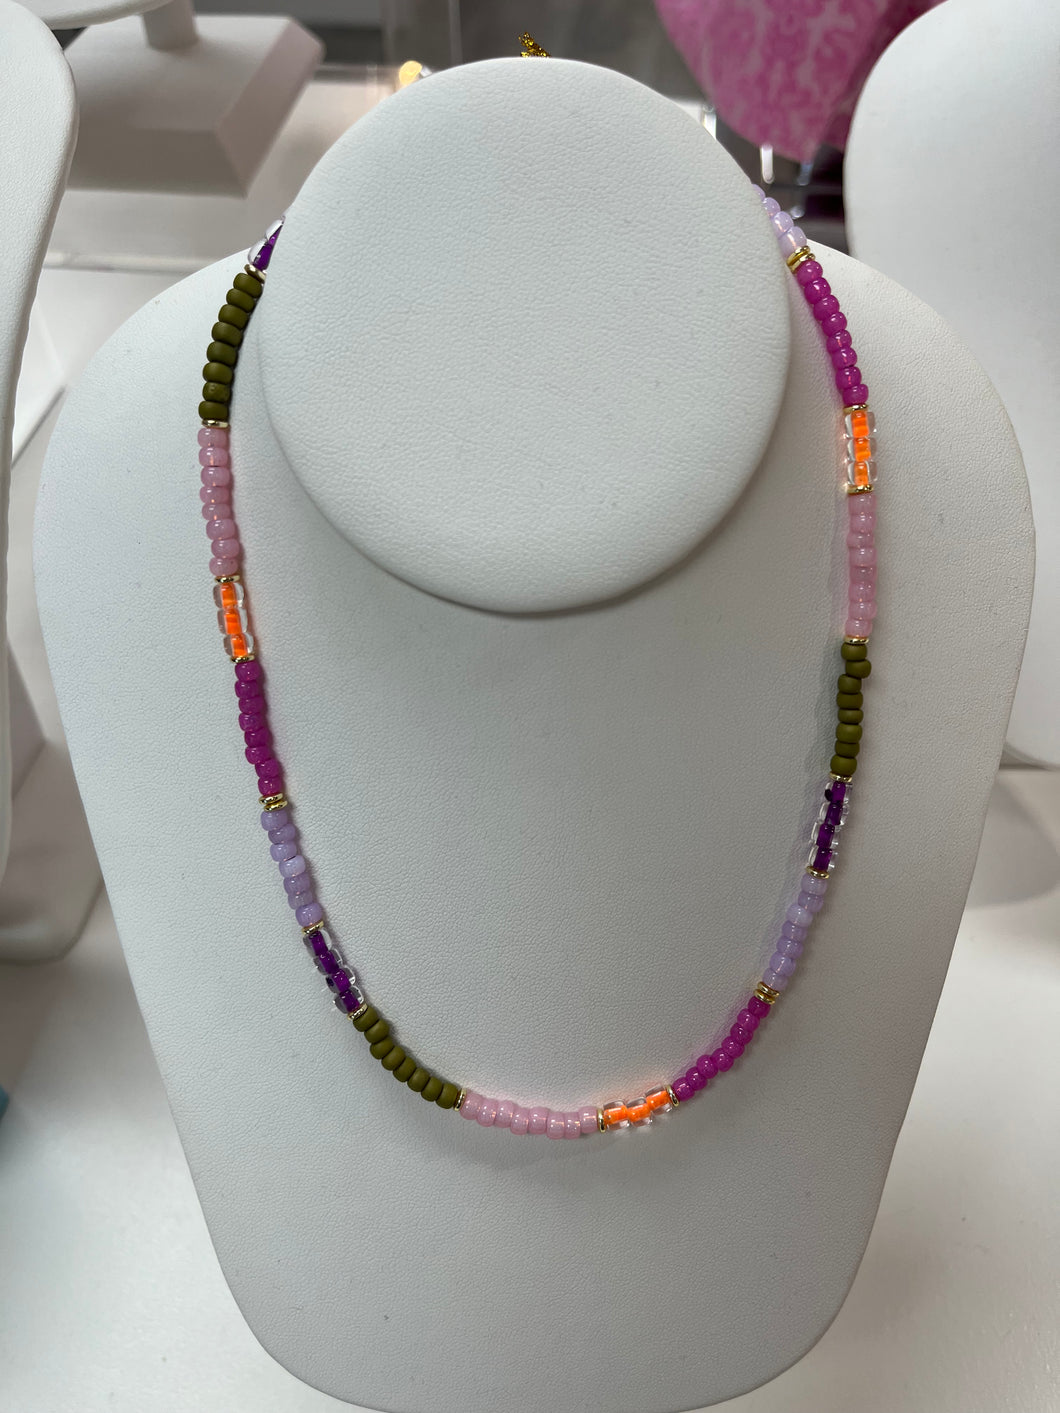 Knotty Bling Neon with Olive Green